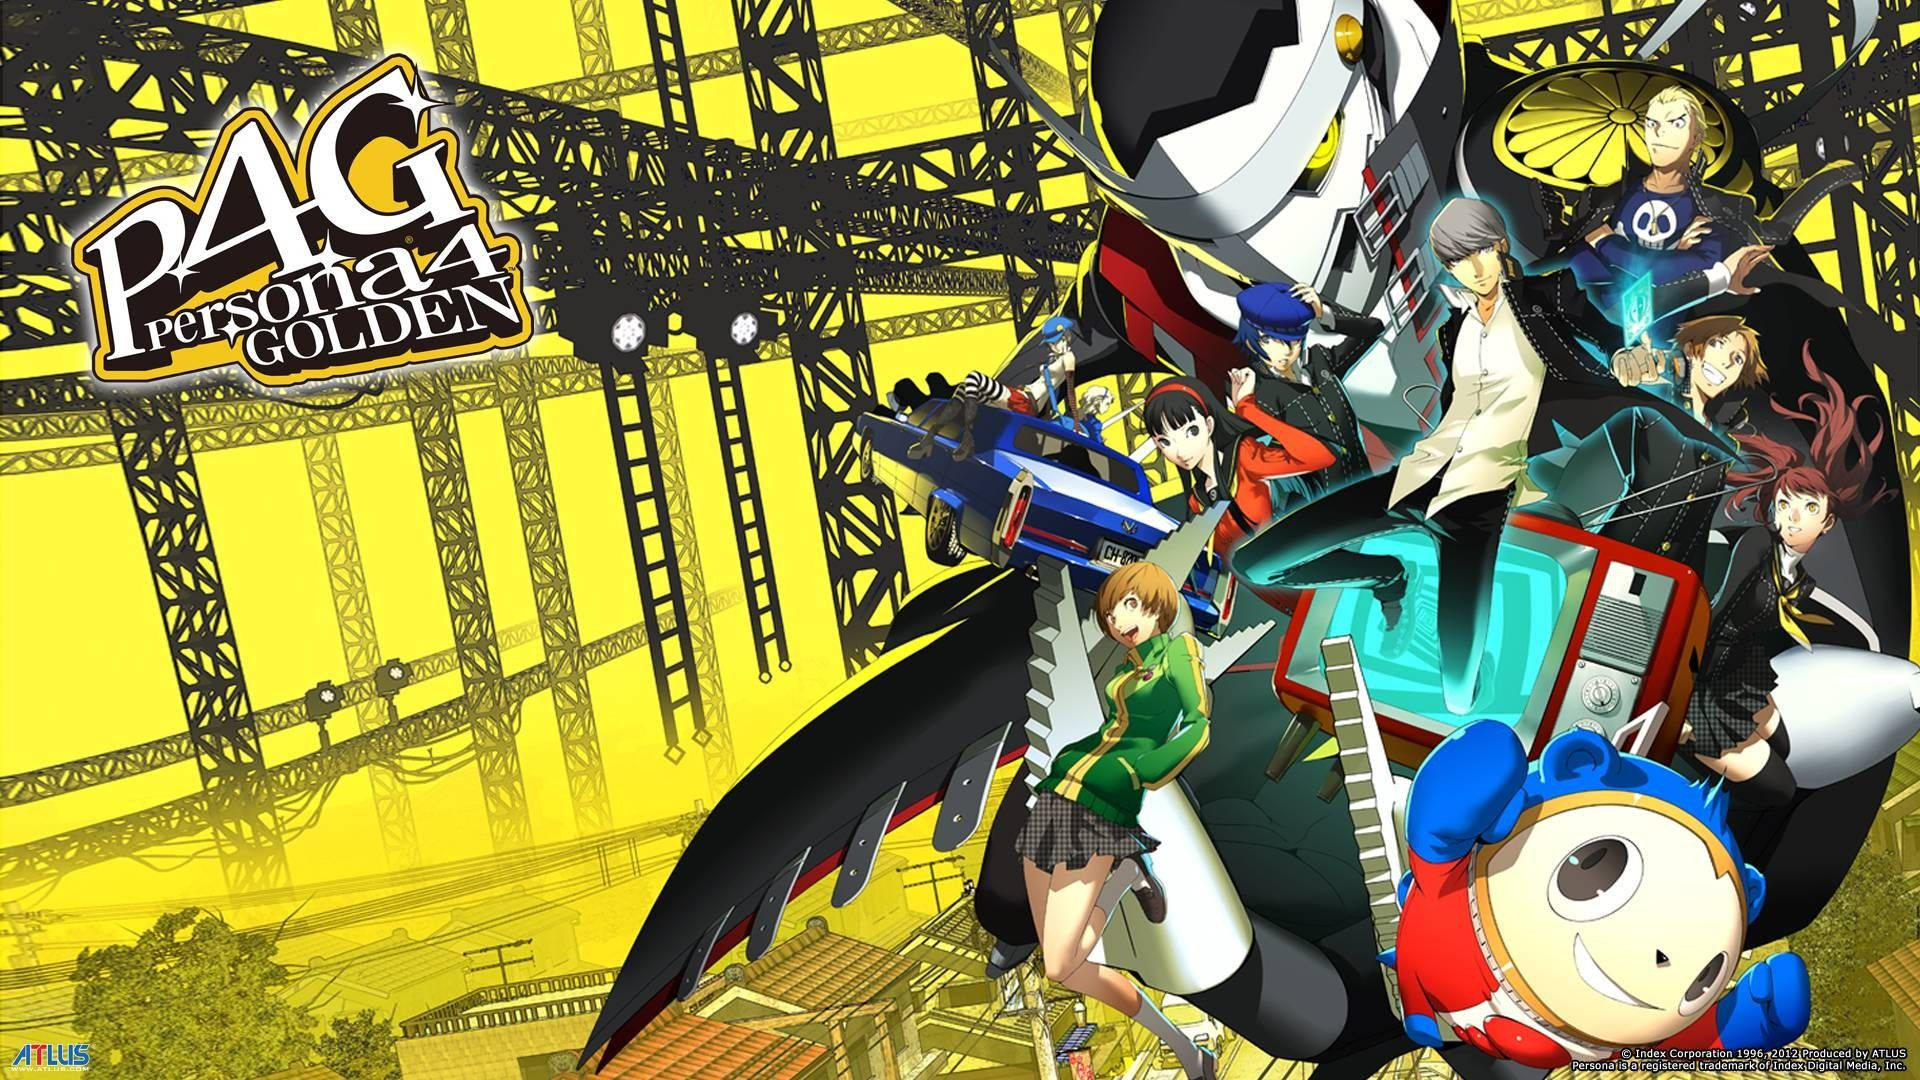 1920X1080 Persona 4 Wallpaper and Background